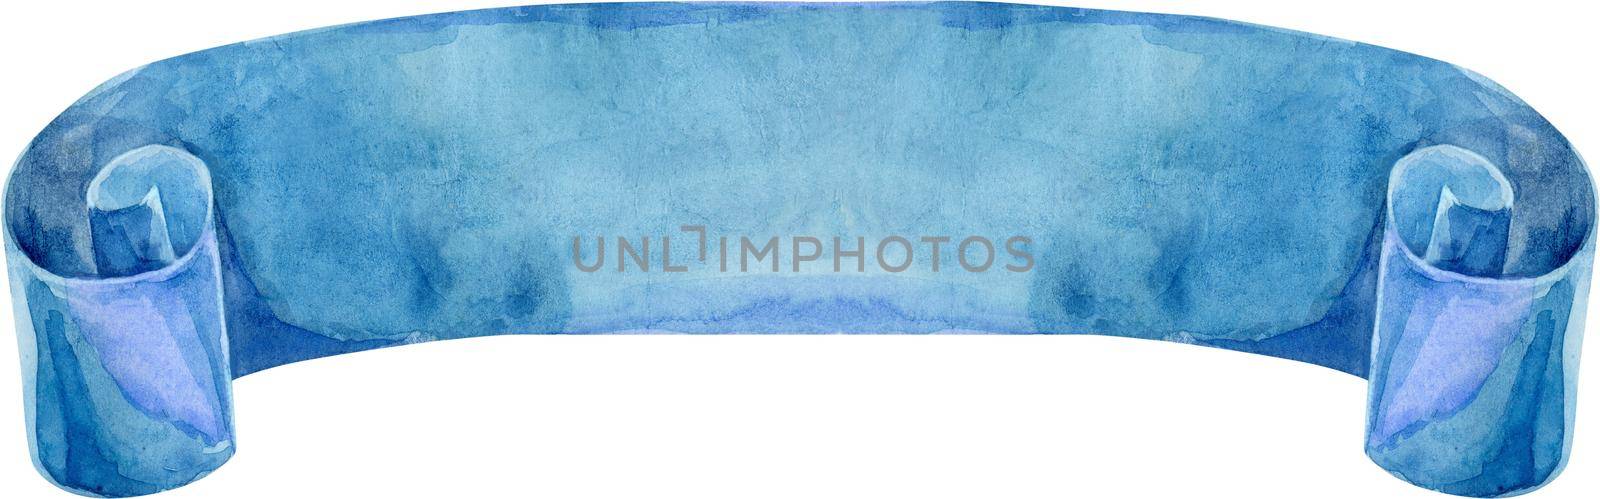 Watercolor vintage blue ribbon. Hand painted banners isolated on white background. by NataOmsk